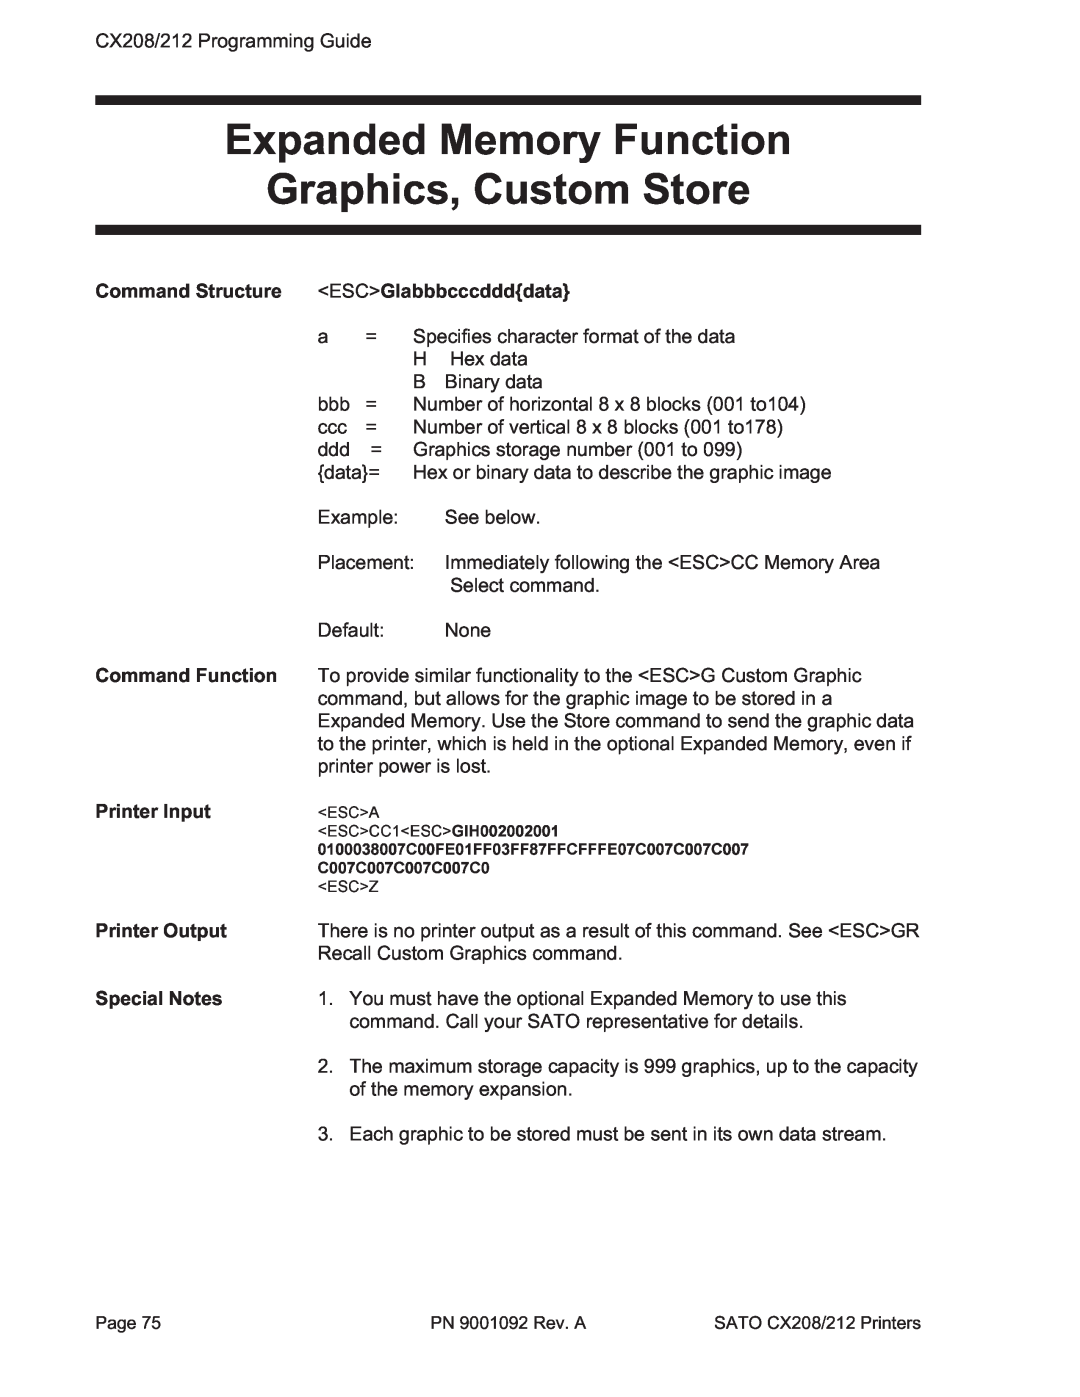 SATO CX208/212 manual Expanded Memory Function Graphics, Custom Store, Command Structure ESCGIabbbcccddddata, Printer Input 